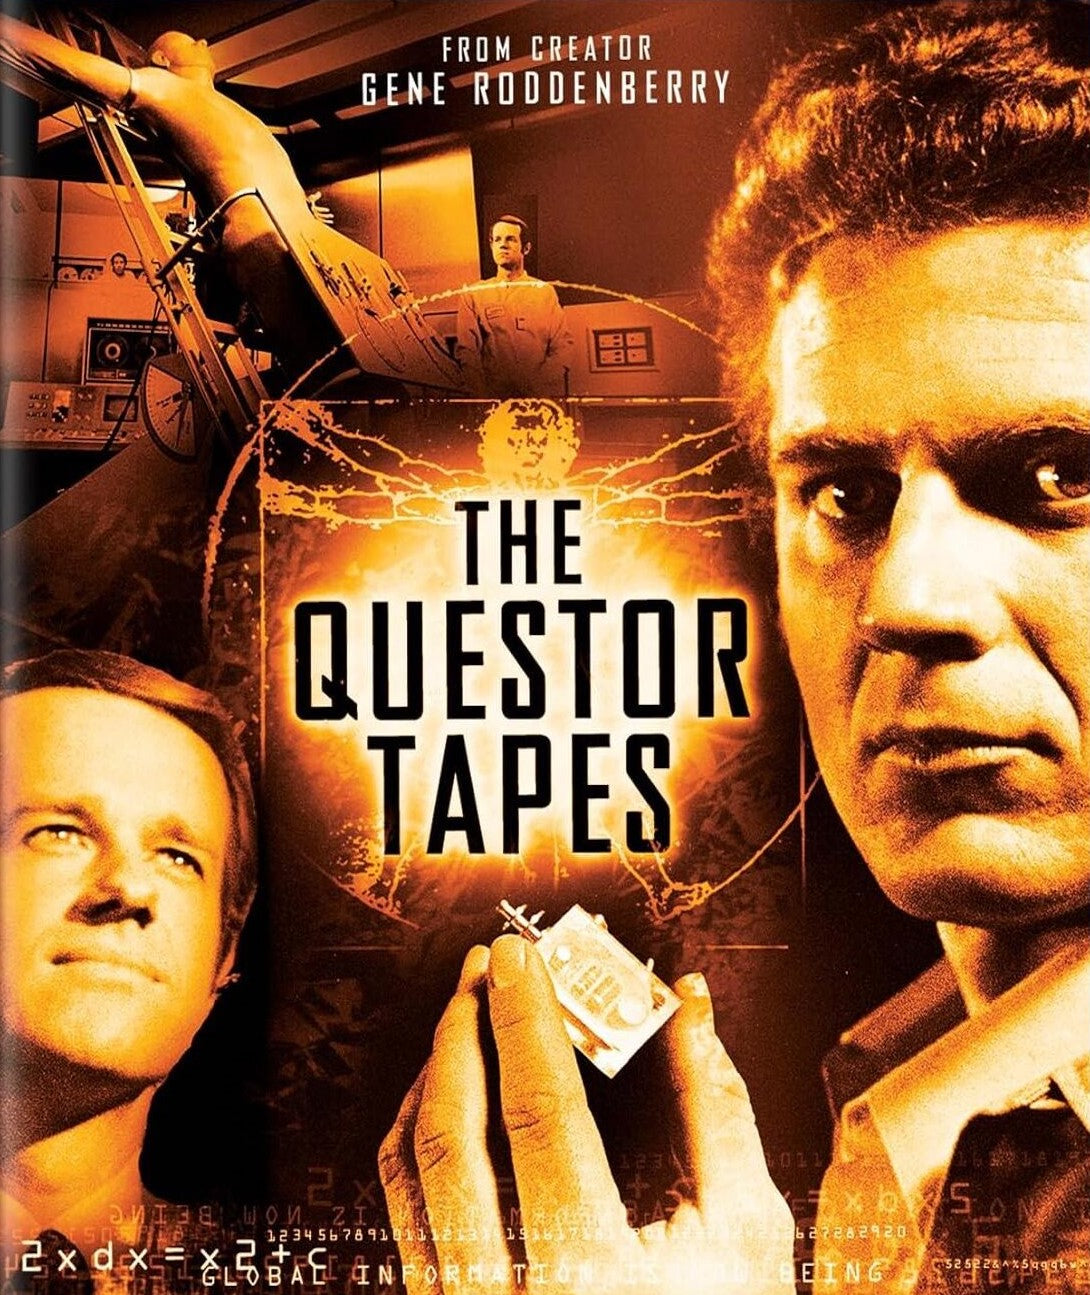 THE QUESTOR TAPES BLU-RAY